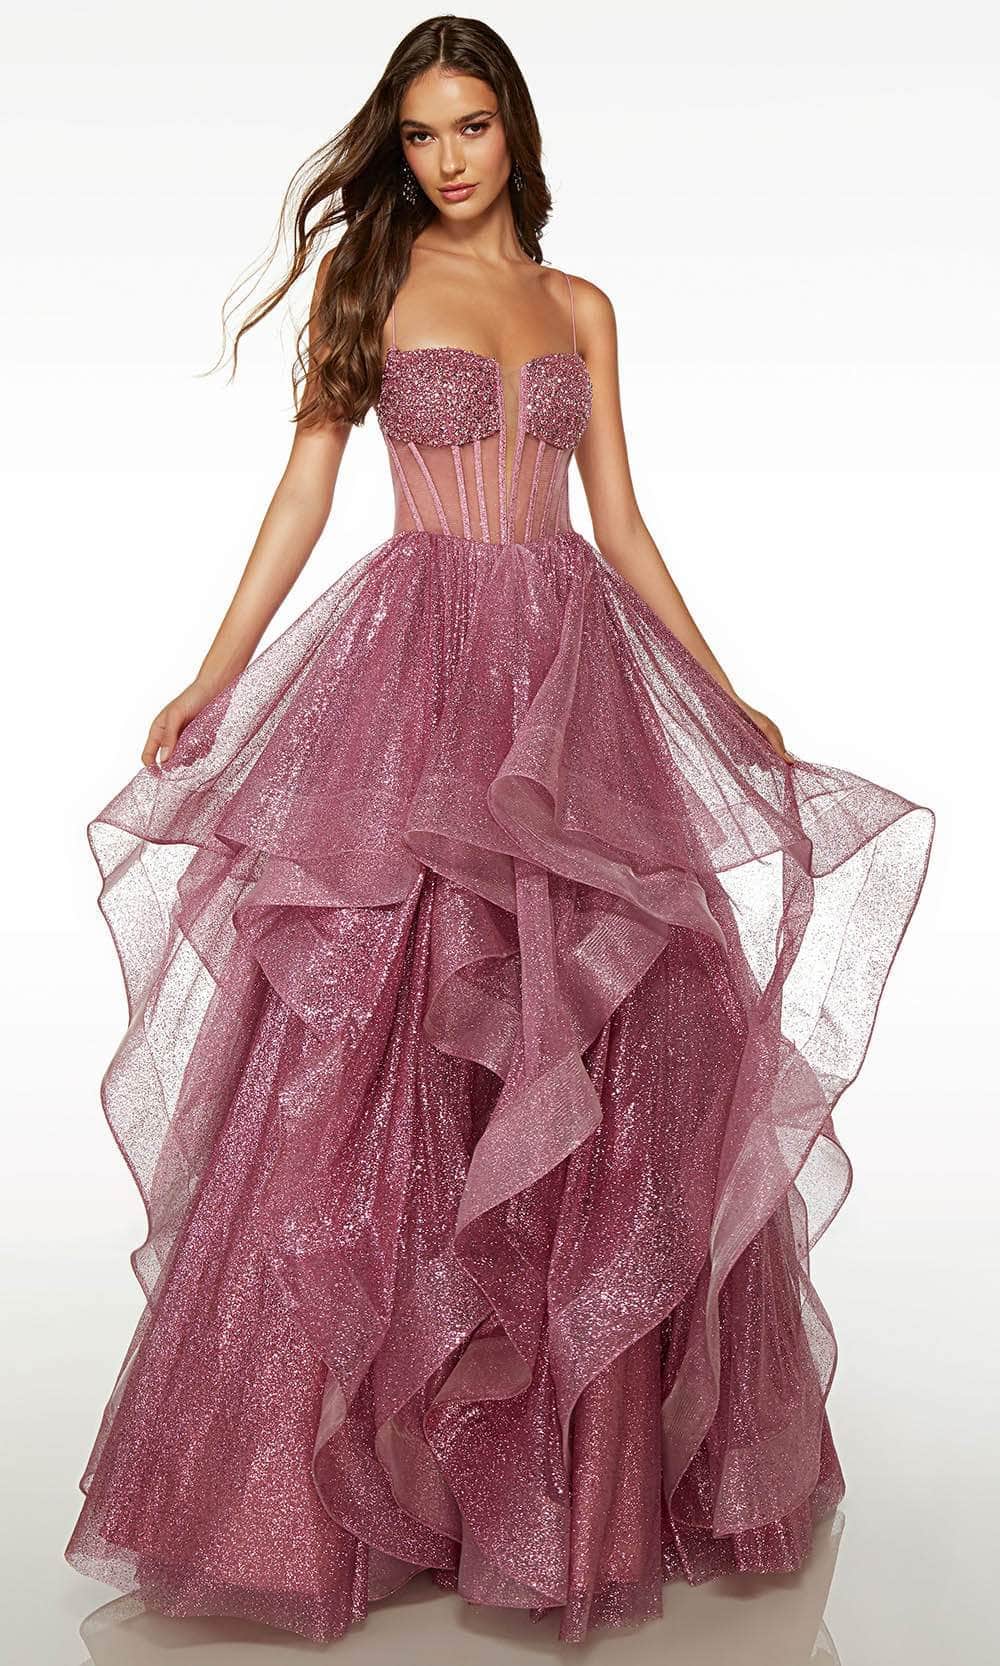 Image of Alyce Paris 61524 - Glittered Illusion Waist Prom Gown